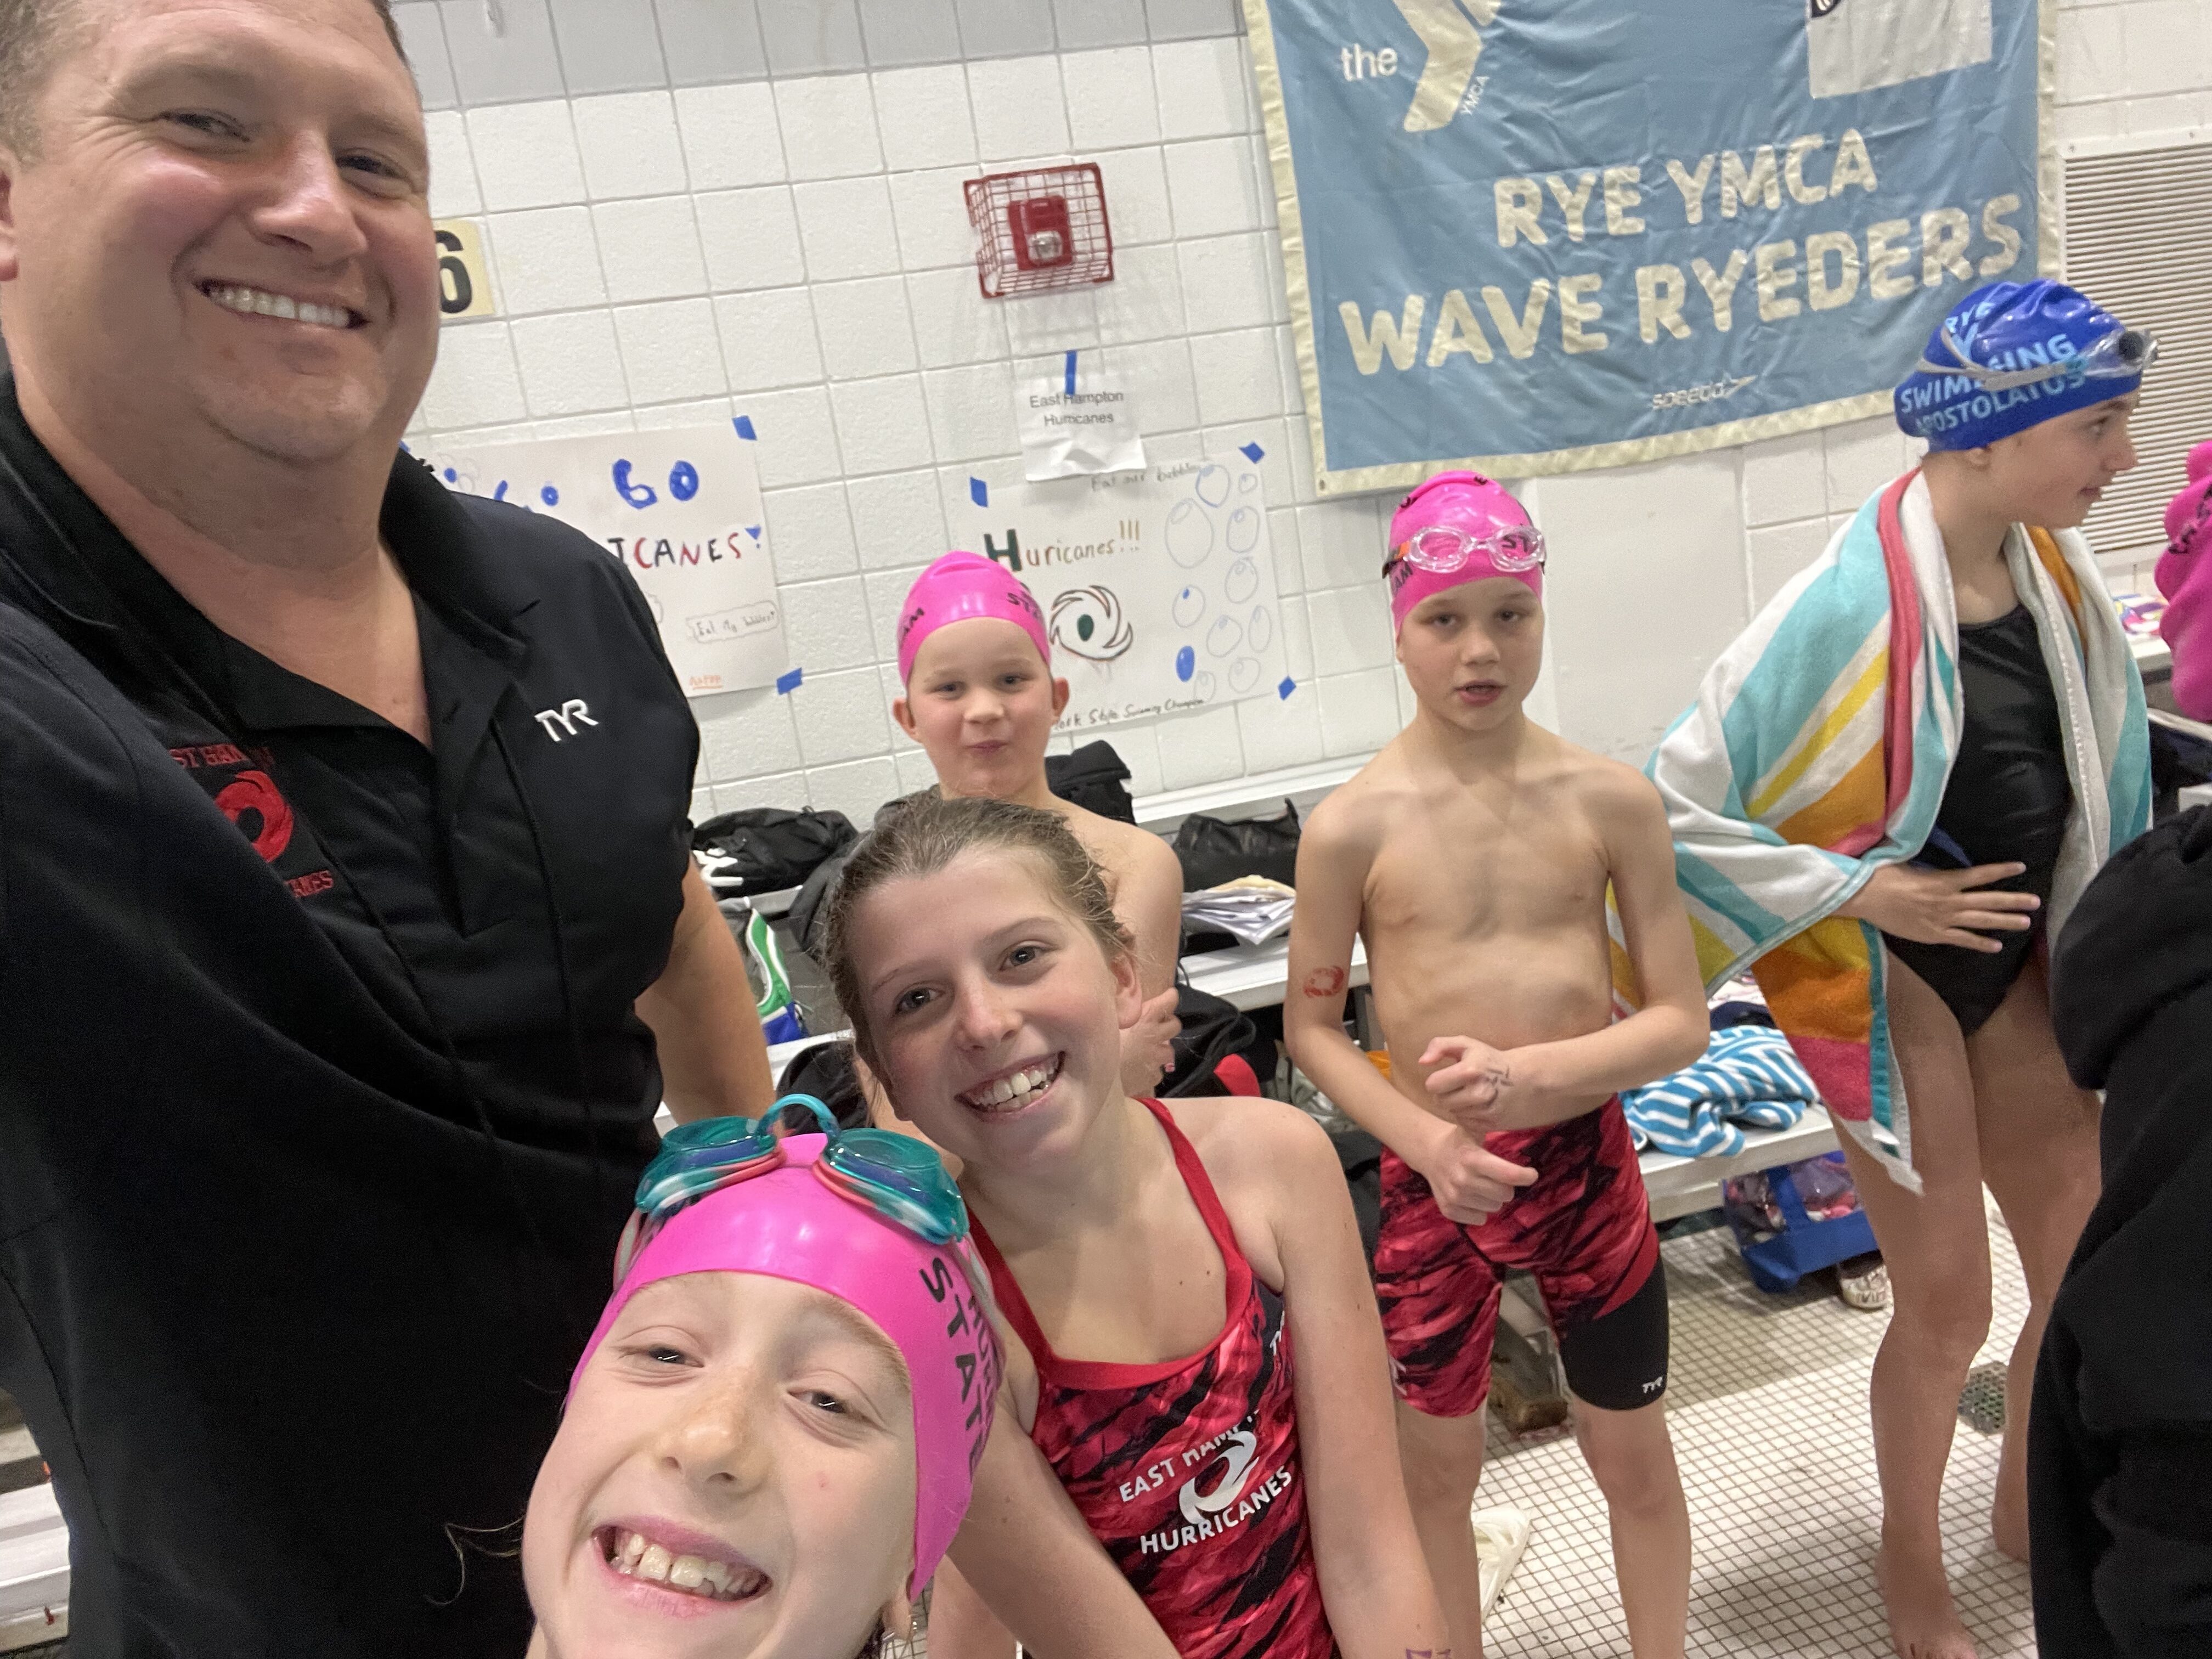 Hurricanes assistant coach Sean Knight with his young swimmers.